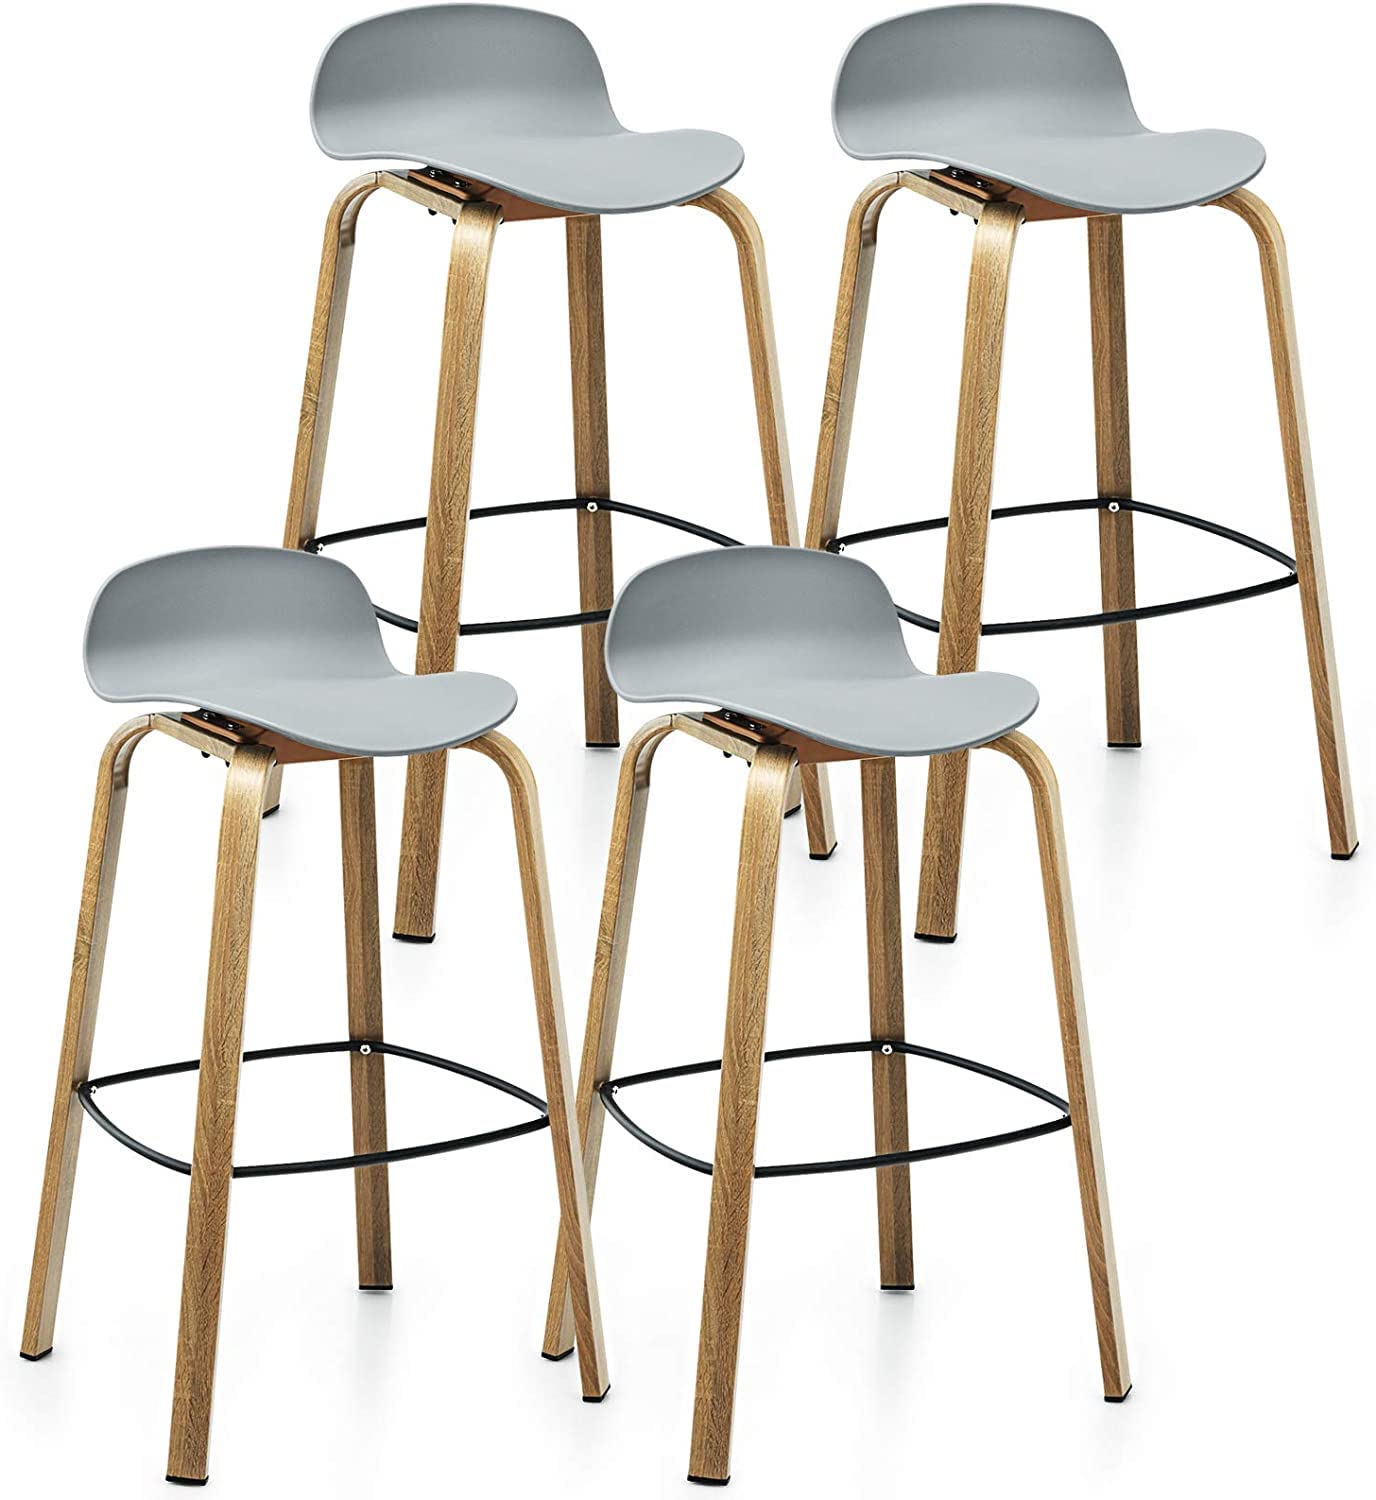 Giantex 30-Inch Modern Minimalist Bar Chairs with Footrest, Low Backrest and Metal Legs, Nordic Style High Stools